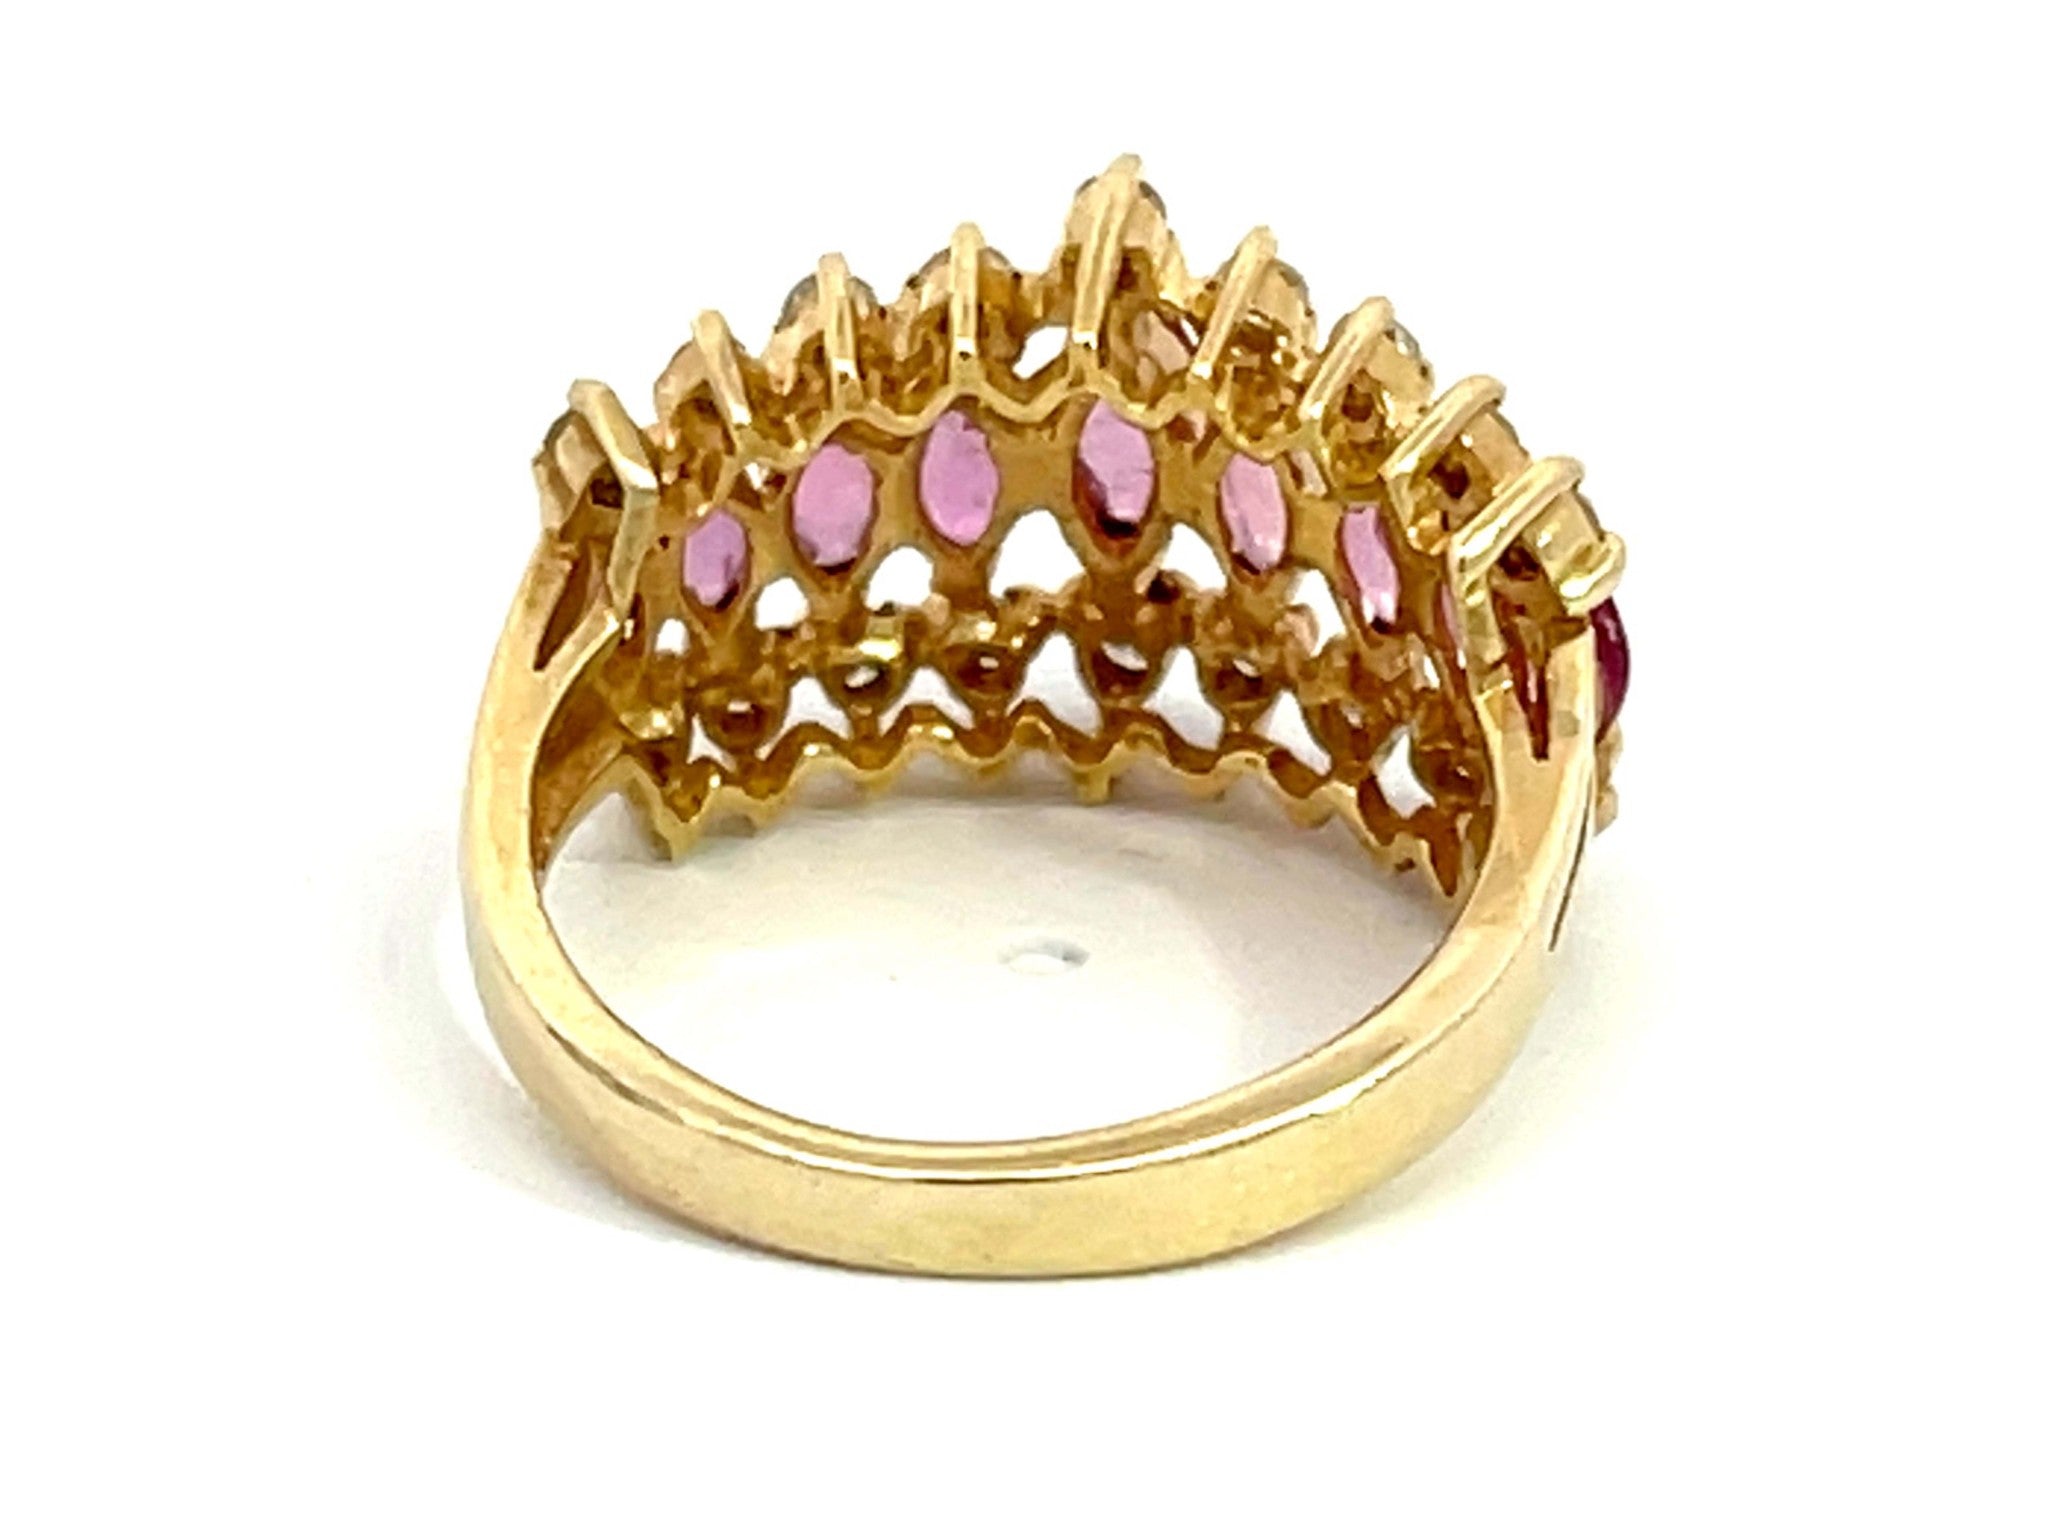 Marquise Ruby and Diamond Border Triple Row Ring in 14k Yellow Gold